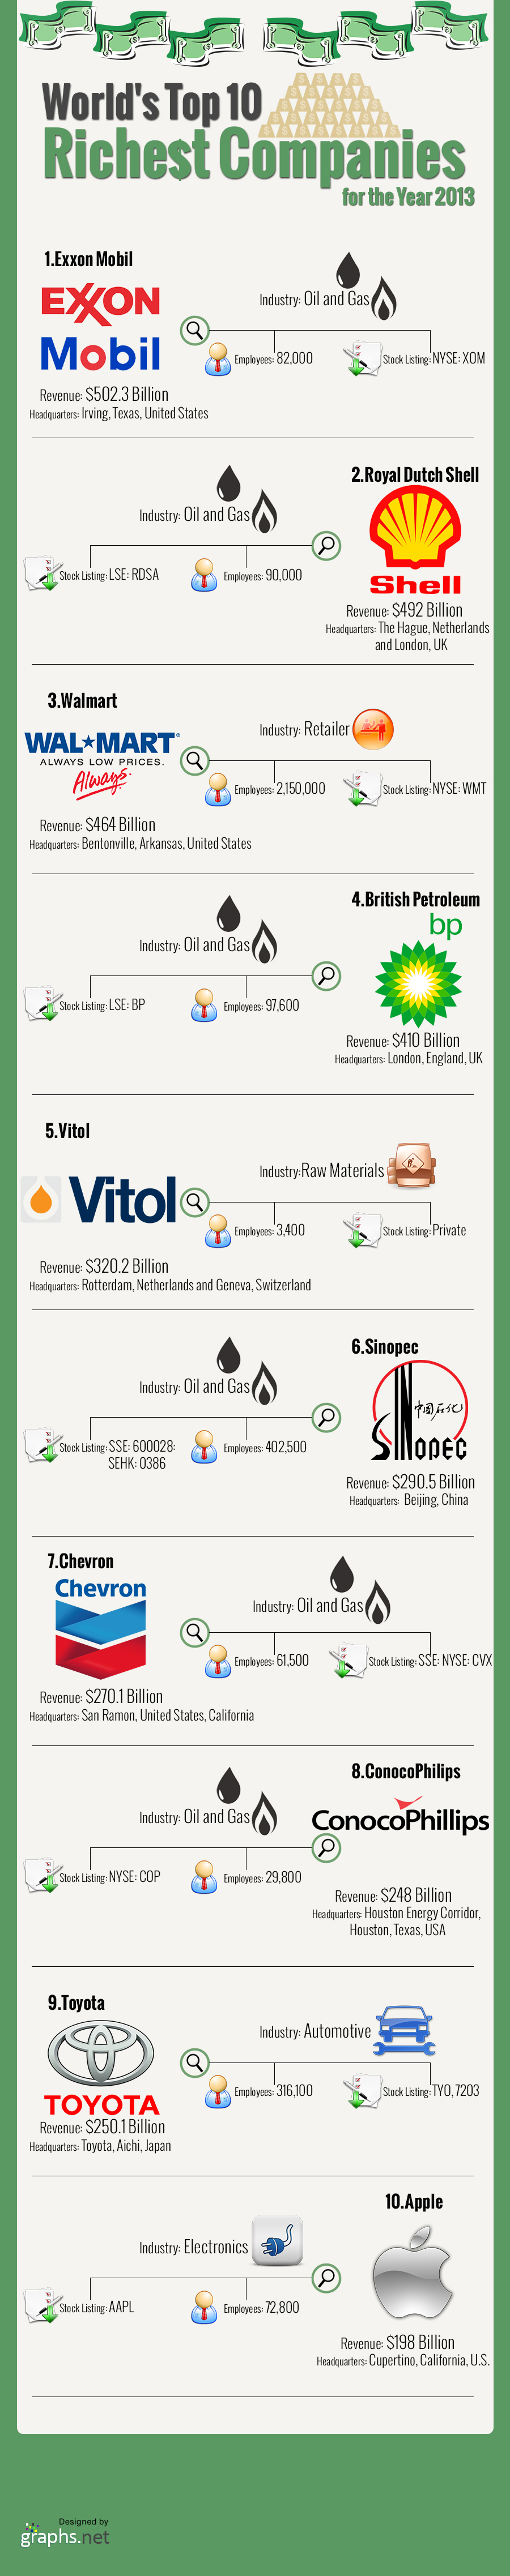 World’s Top 10 Richest Companies For The Year 2013 (Infographic)